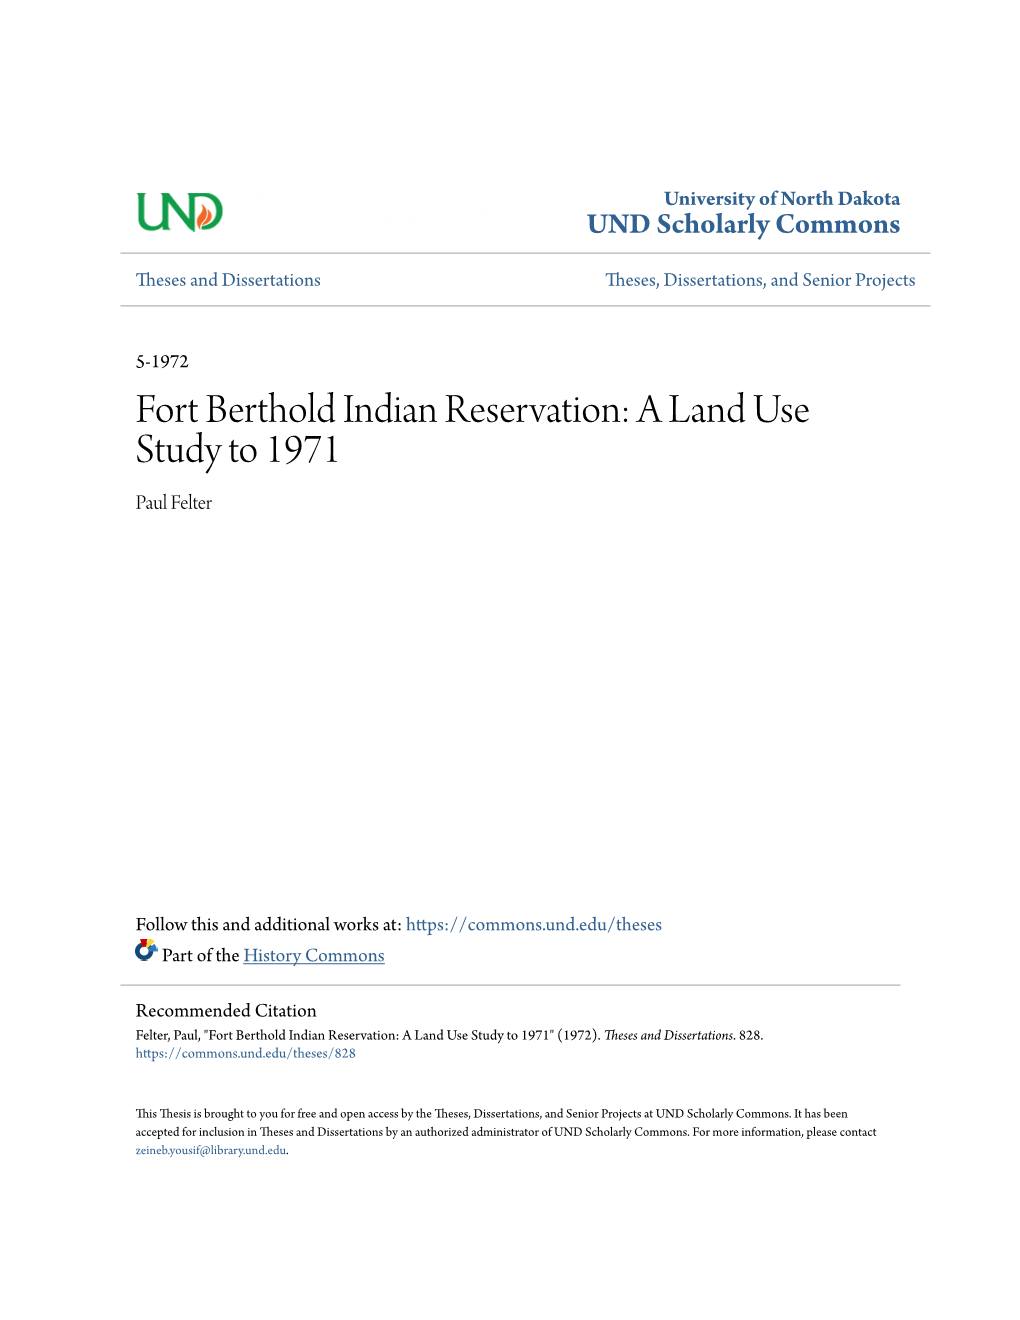 Fort Berthold Indian Reservation: a Land Use Study to 1971 Paul Felter